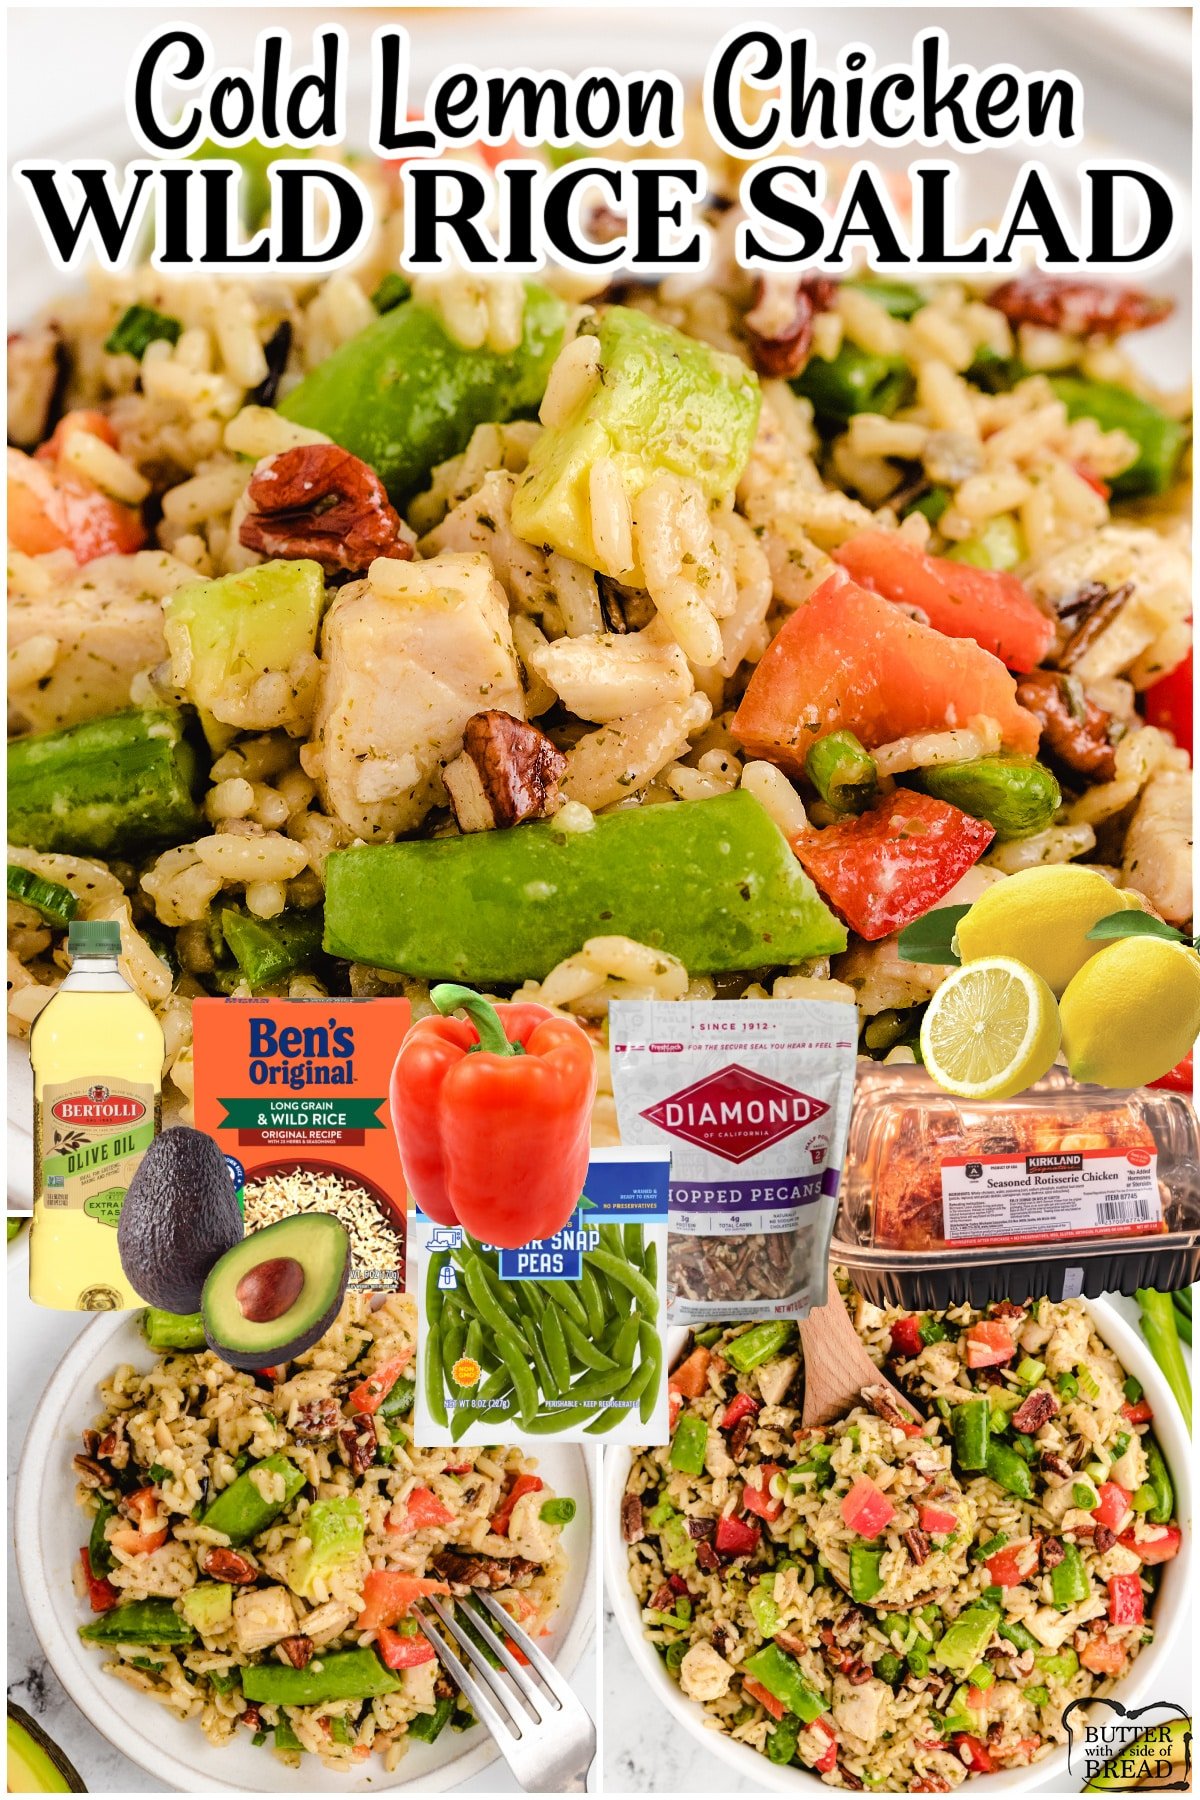 Chicken Wild Rice Salad is a fantastic summer meal! Juicy chicken is tossed with wild rice, tons of veggies & a delightful vinaigrette for this easy, tangy chilled salad! 